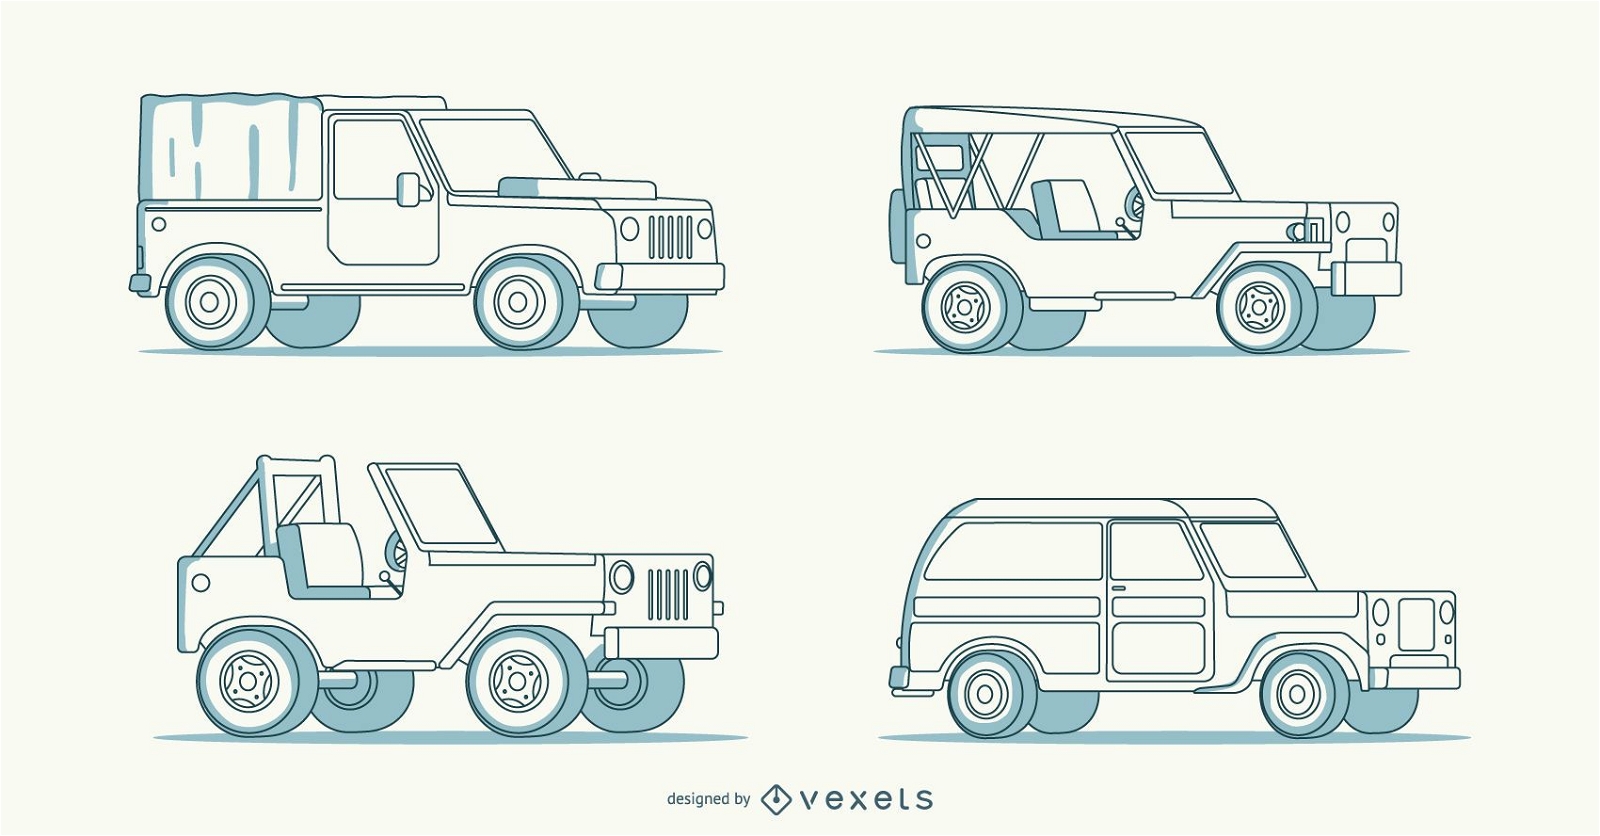 Four intricate hand-drawn car illustrations